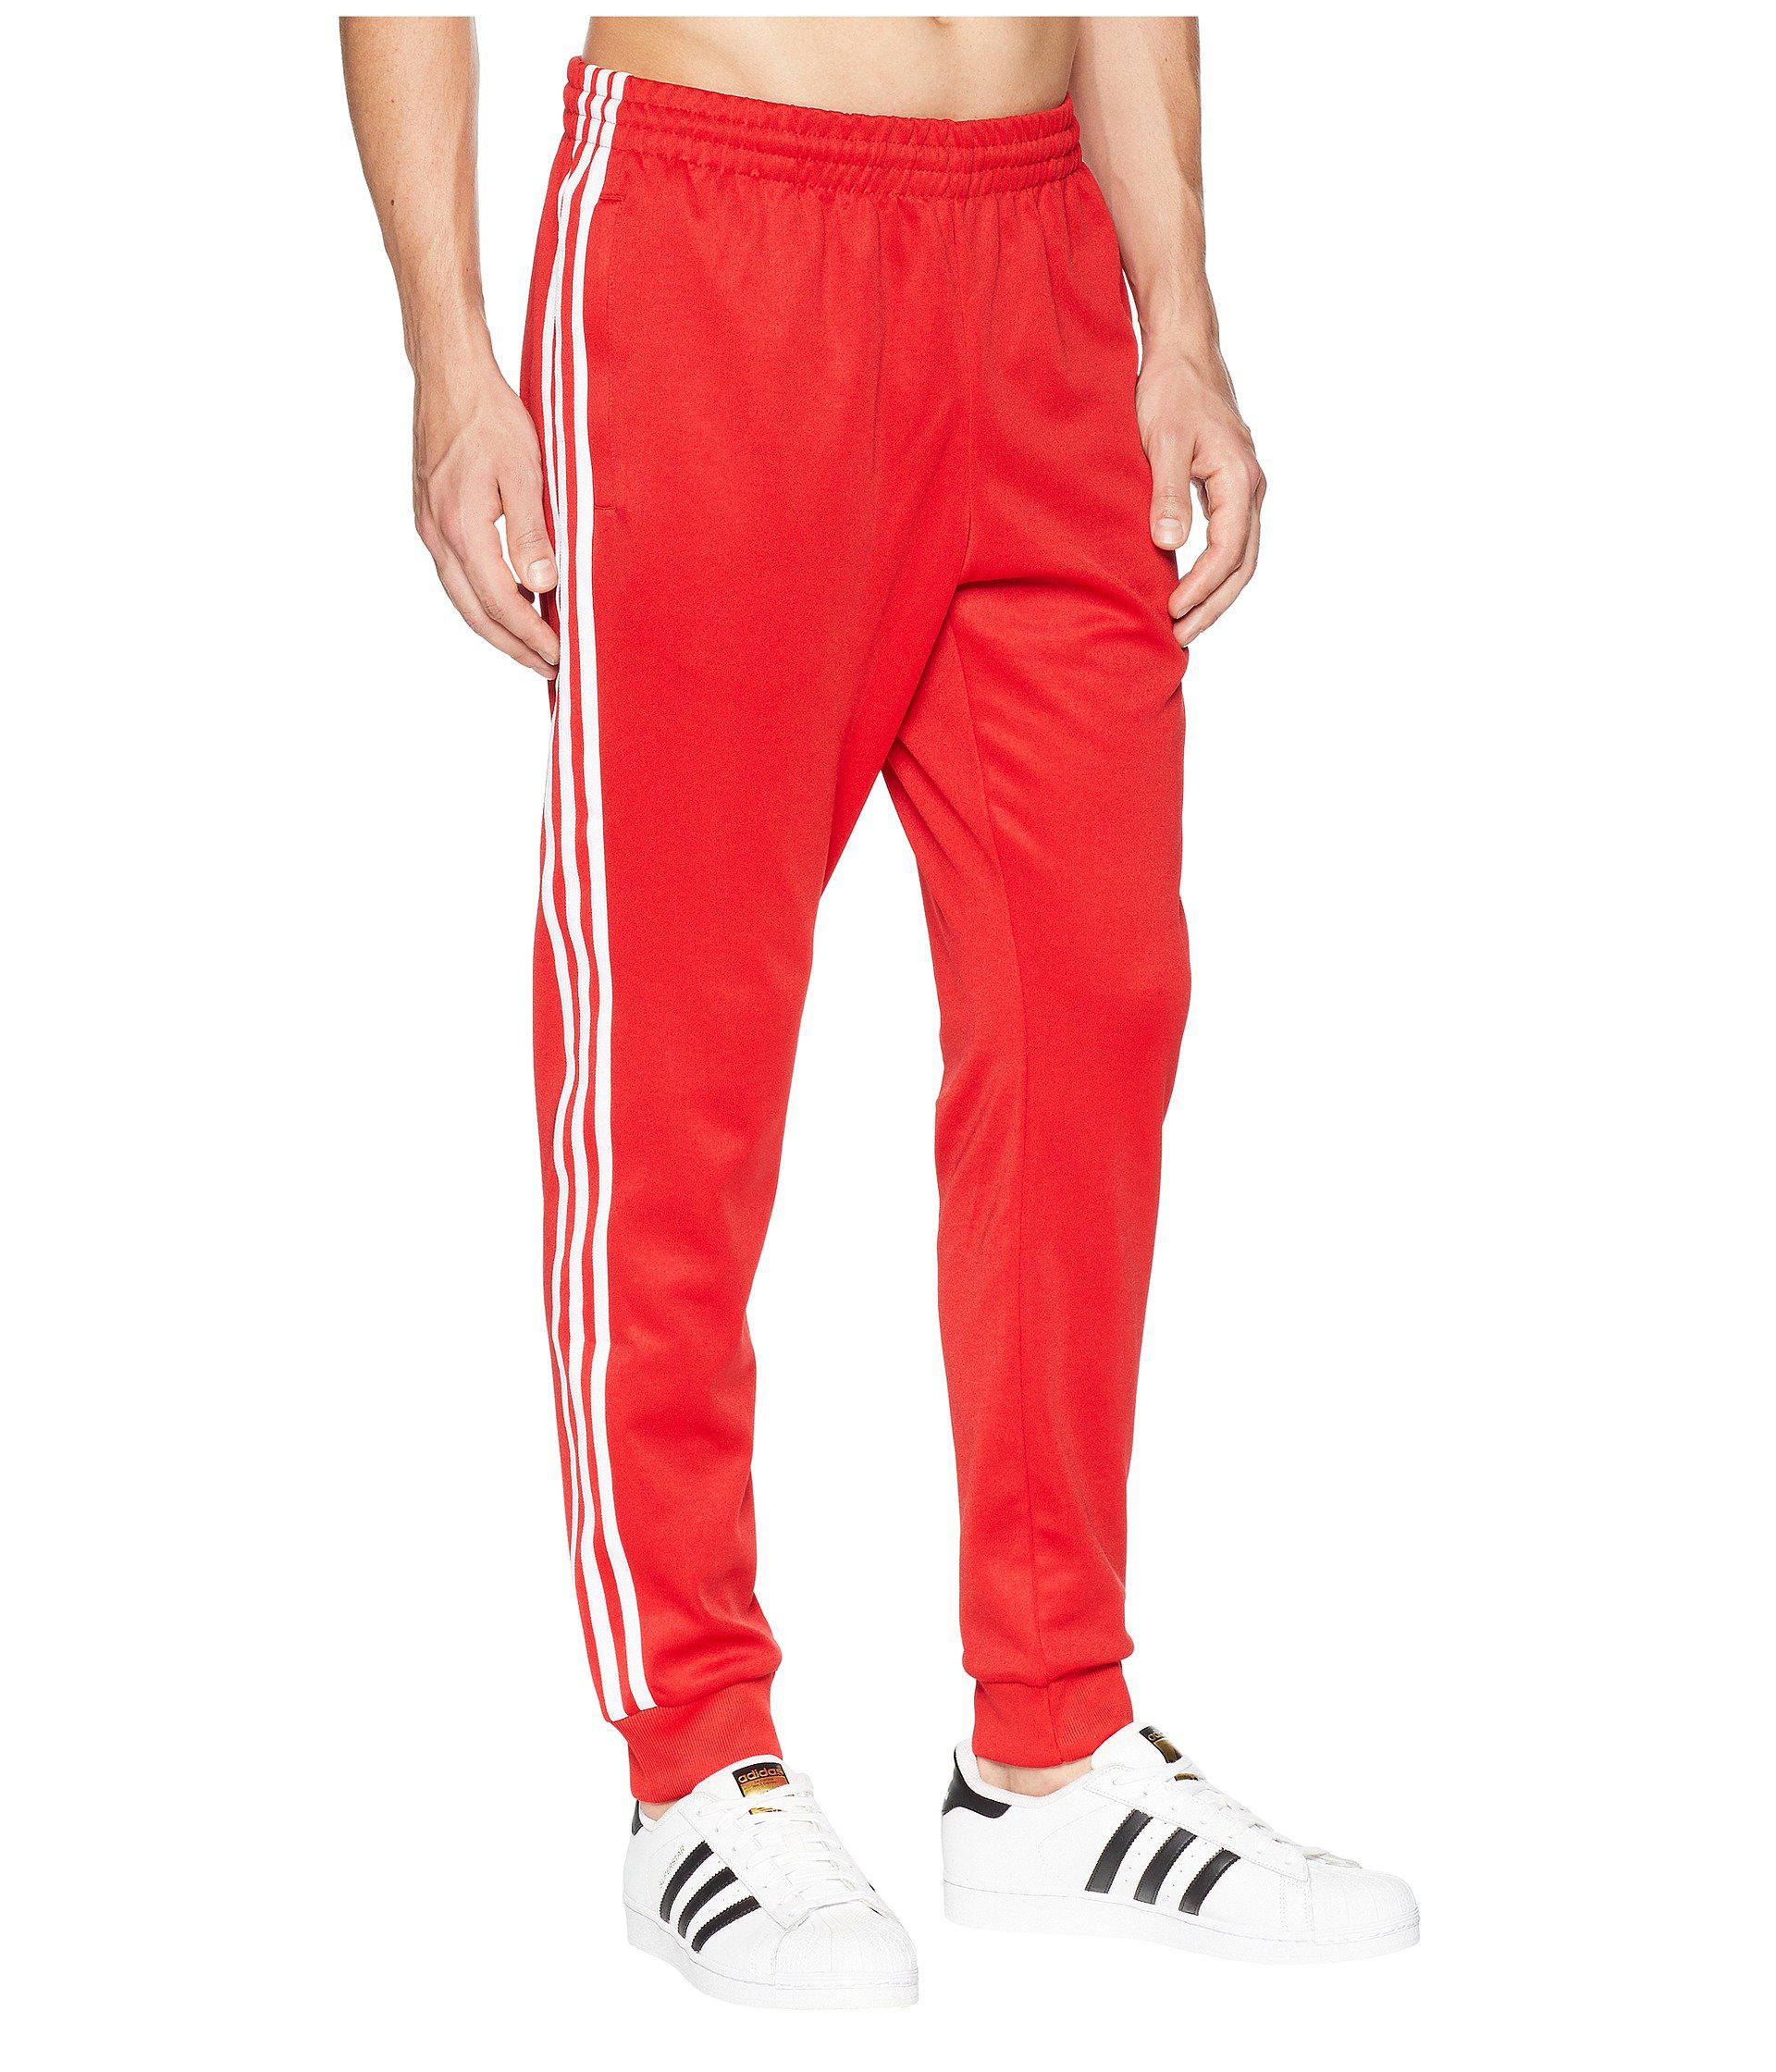 adidas Originals Synthetic Sst Track Pants in Scarlet (Red) for Men - Lyst